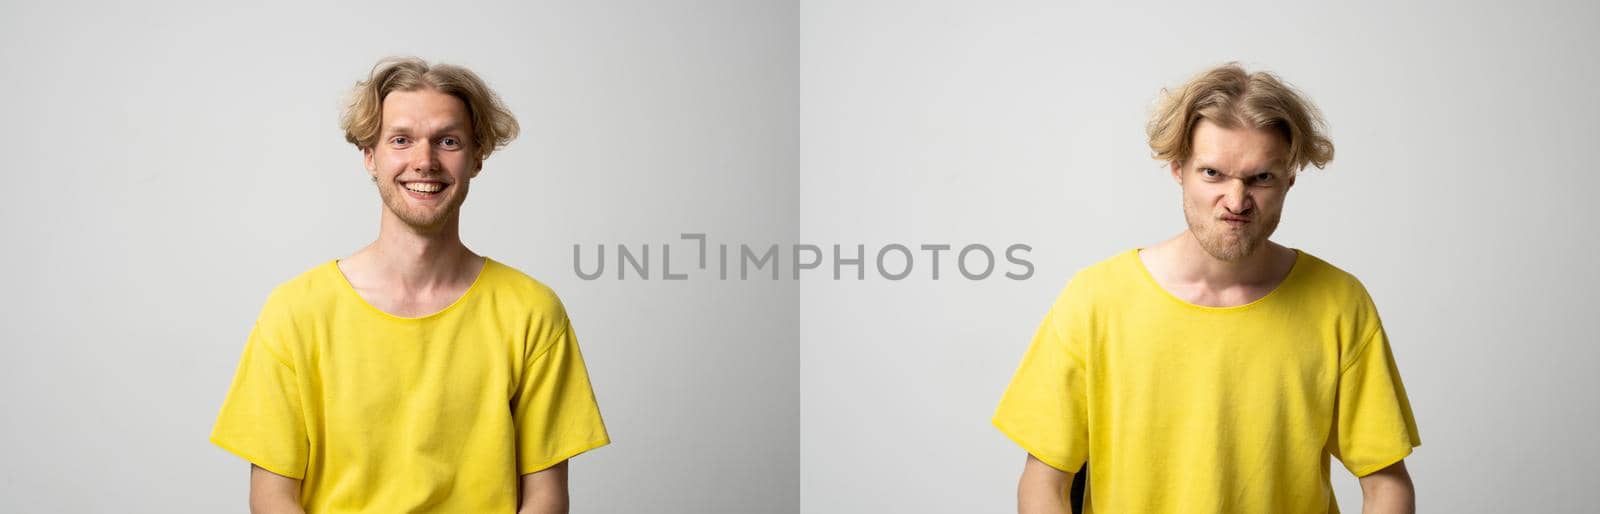 Set of two photo of handsome man with different emotions and gestures isolated over white background. Sad, happy and angry